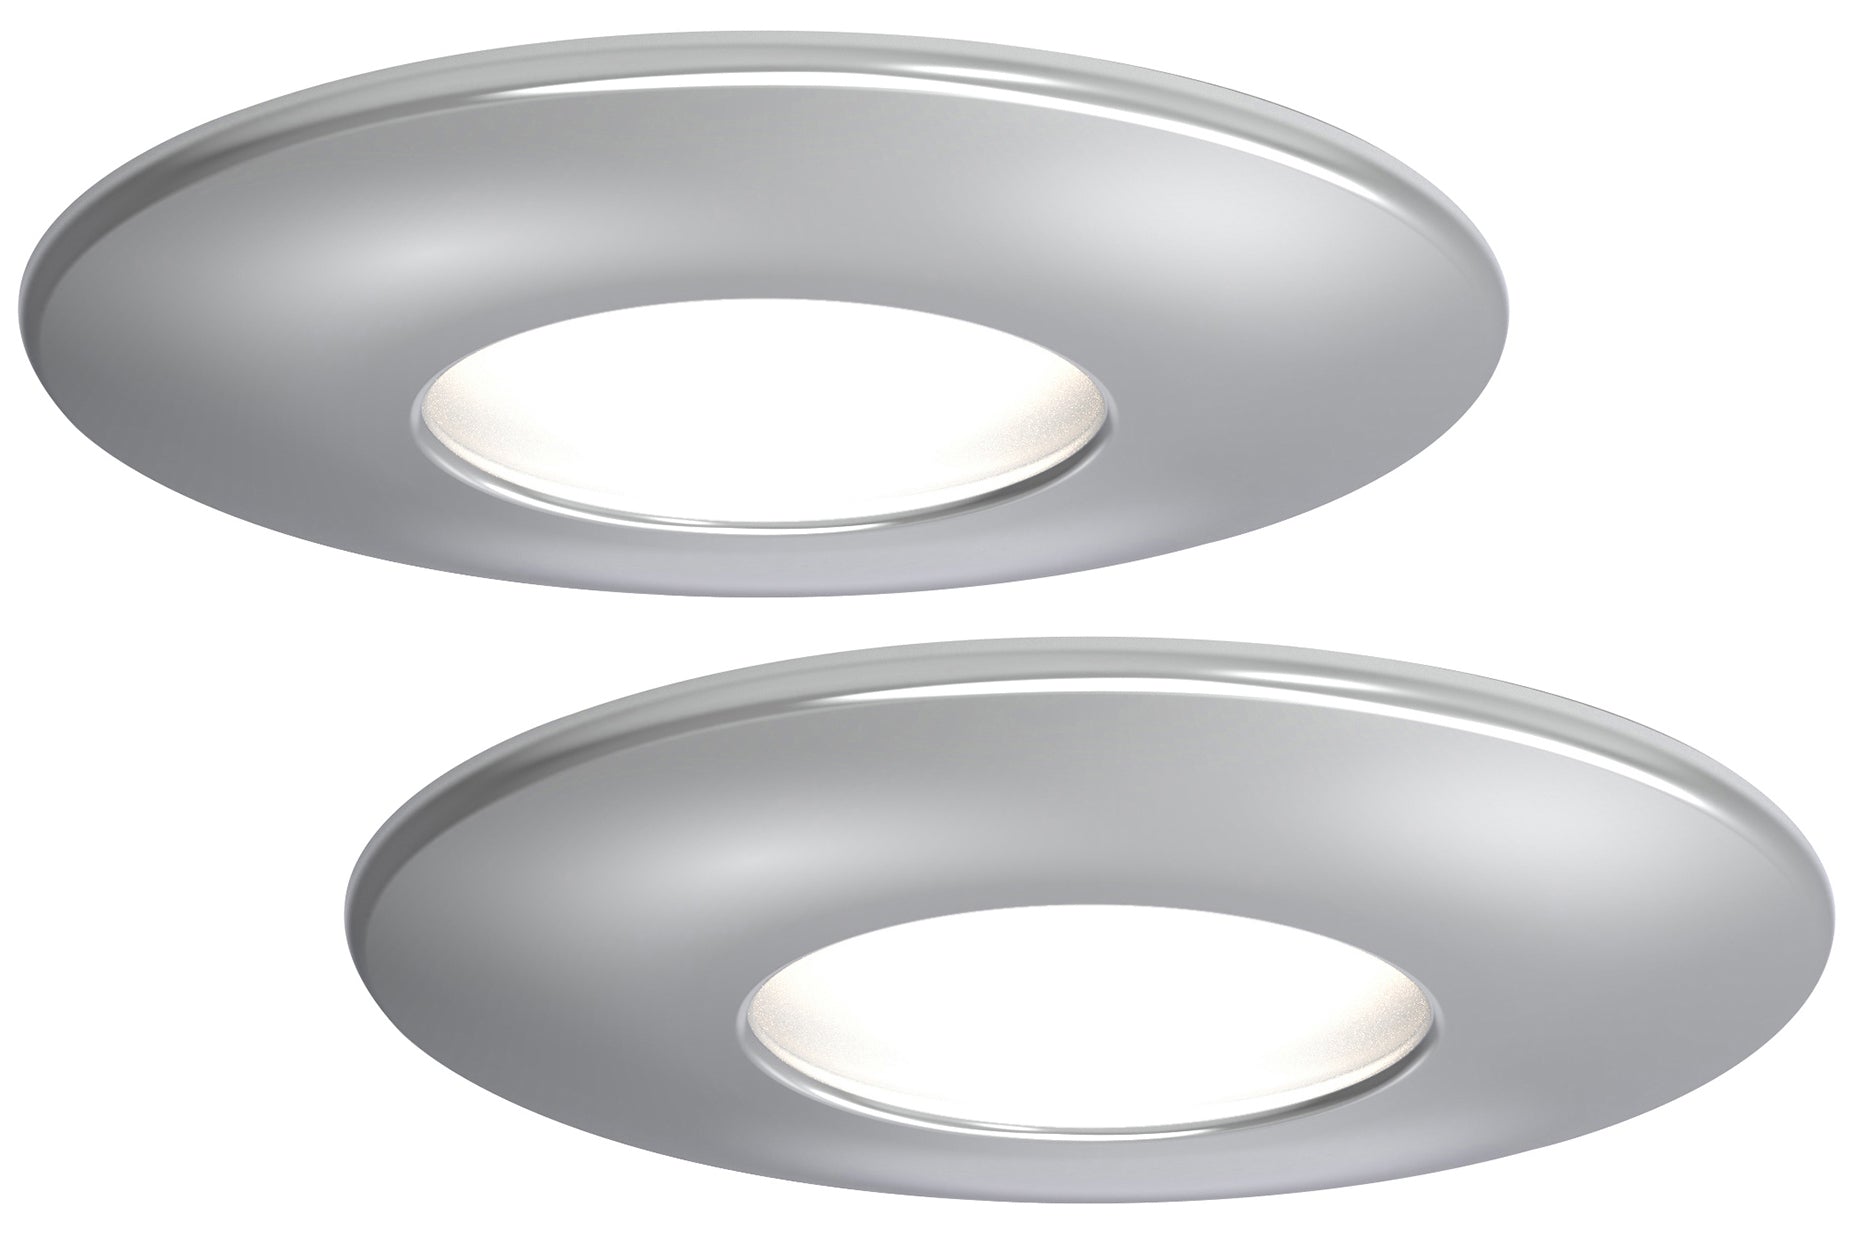 4lite WiZ Connected Fire-Rated IP65 GU10 Smart LED Downlight - Chrome (Pack of 2)